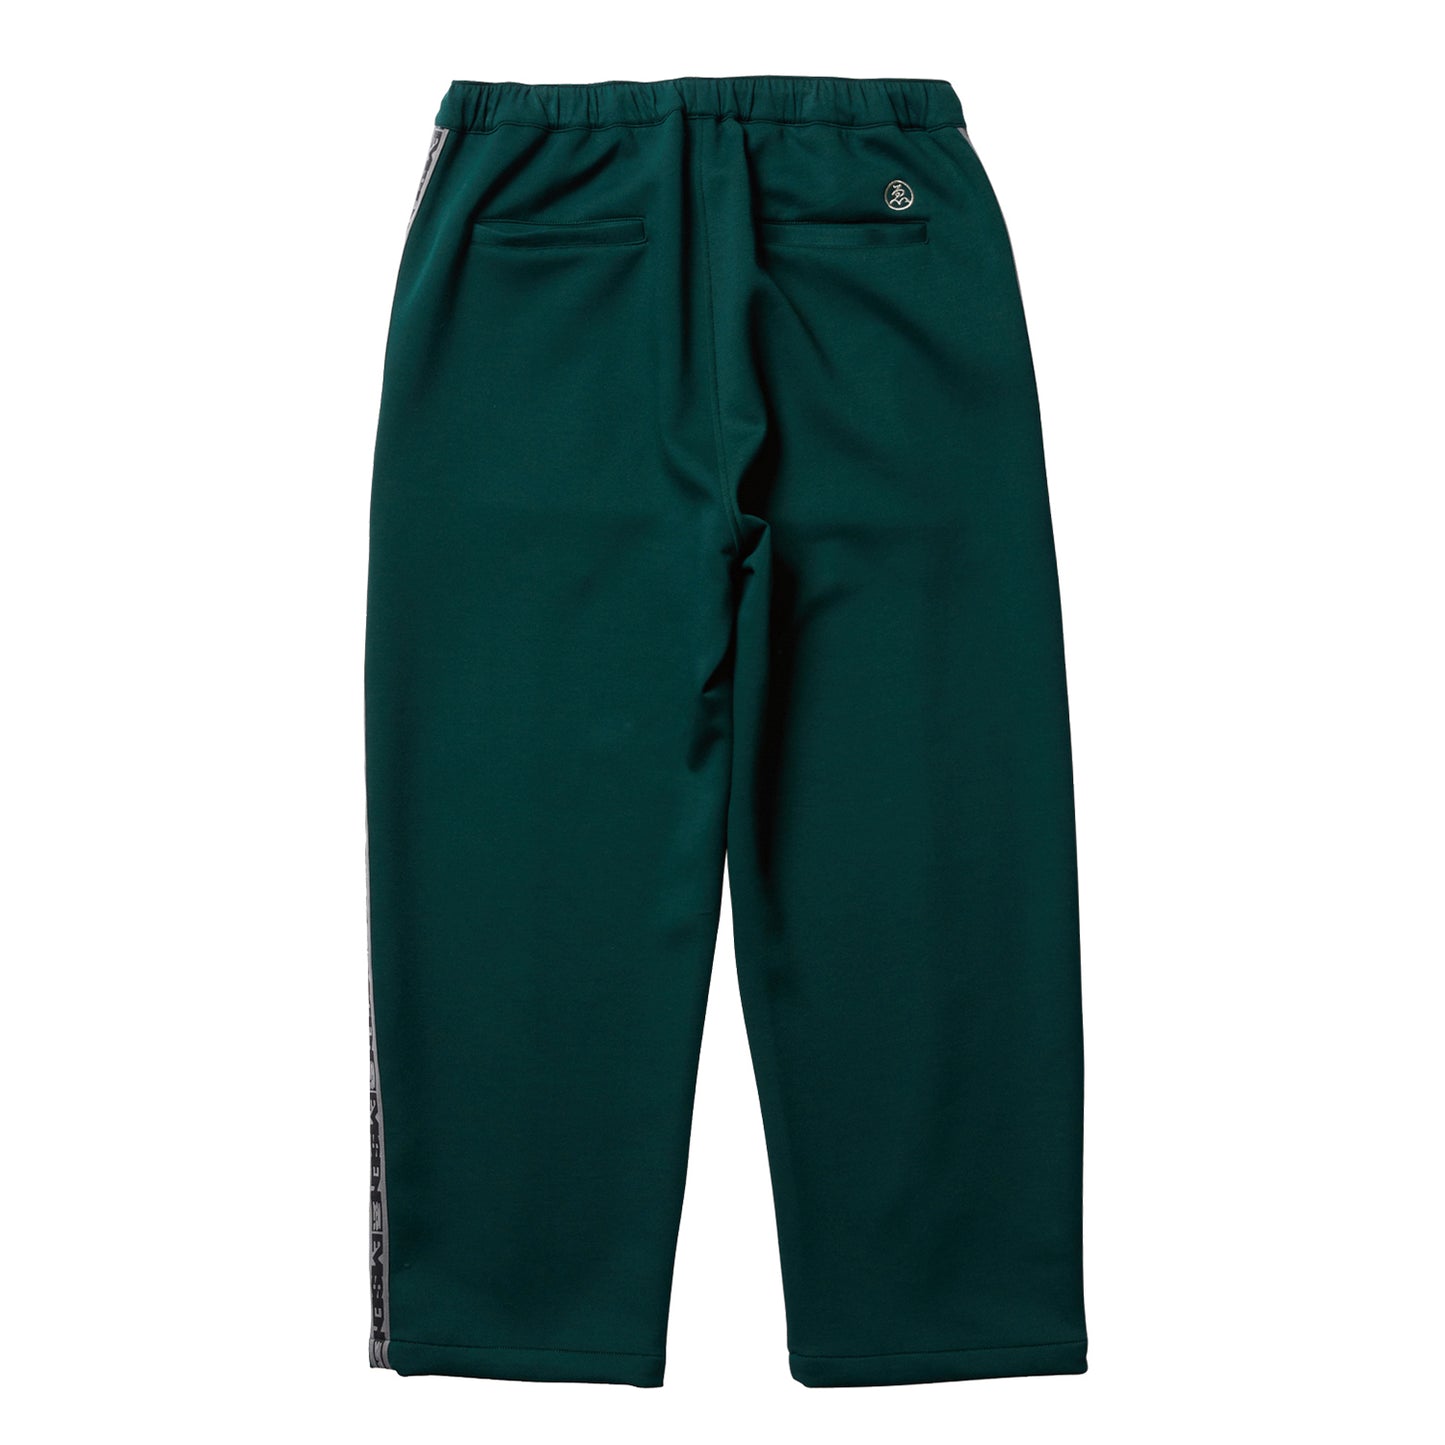 MIND TRACK PANTS - FOREST GREEN